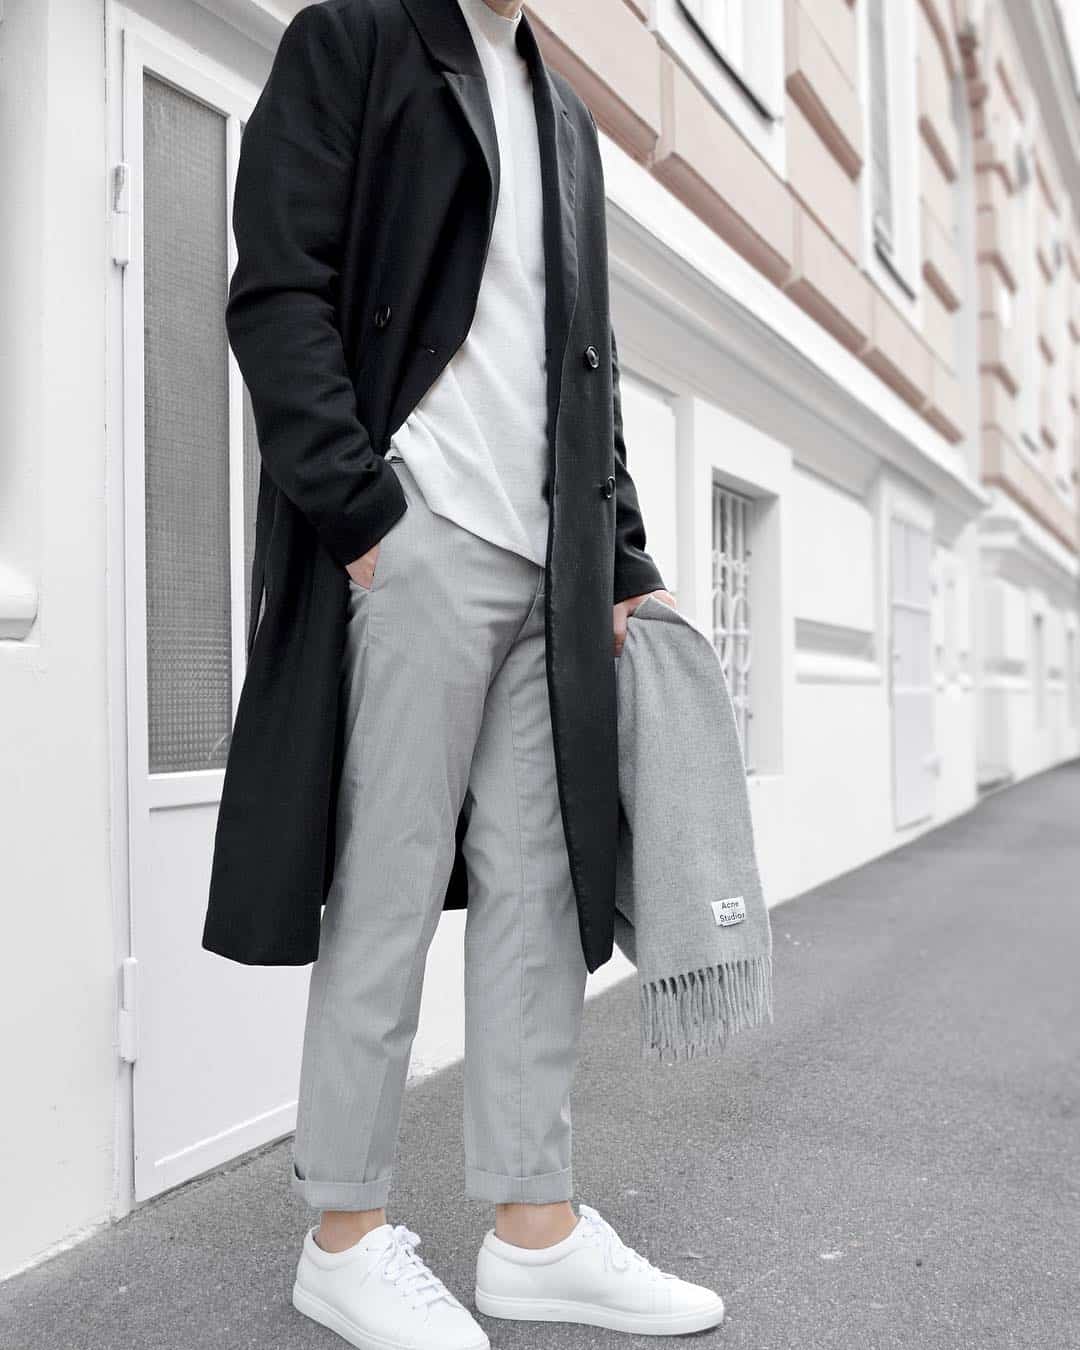 a man wearing grey chinos with a white top, a black trench coat, and white sneakers